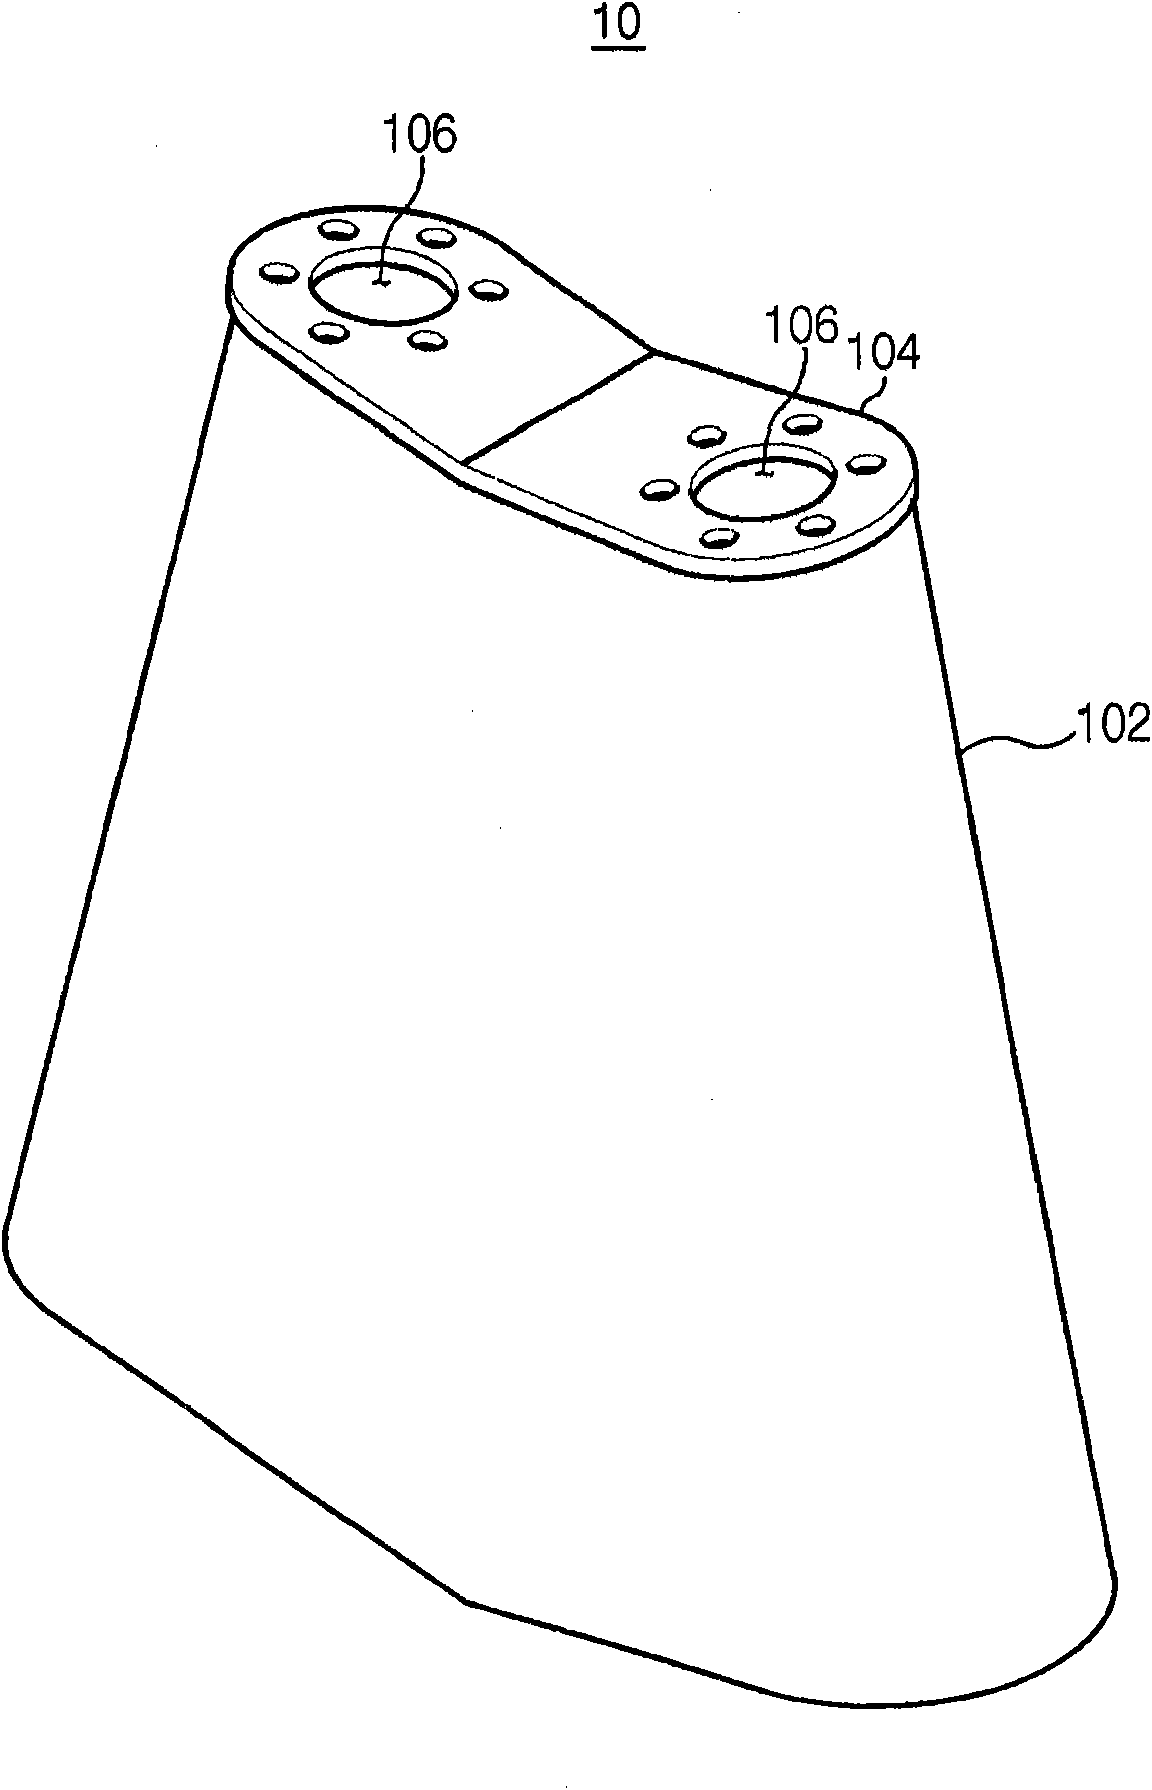 Apparatus for manufacturing compacted irons of reduced materials comprising fine direct reduced irons and apparatus for manufacturing molten irons provided with the same